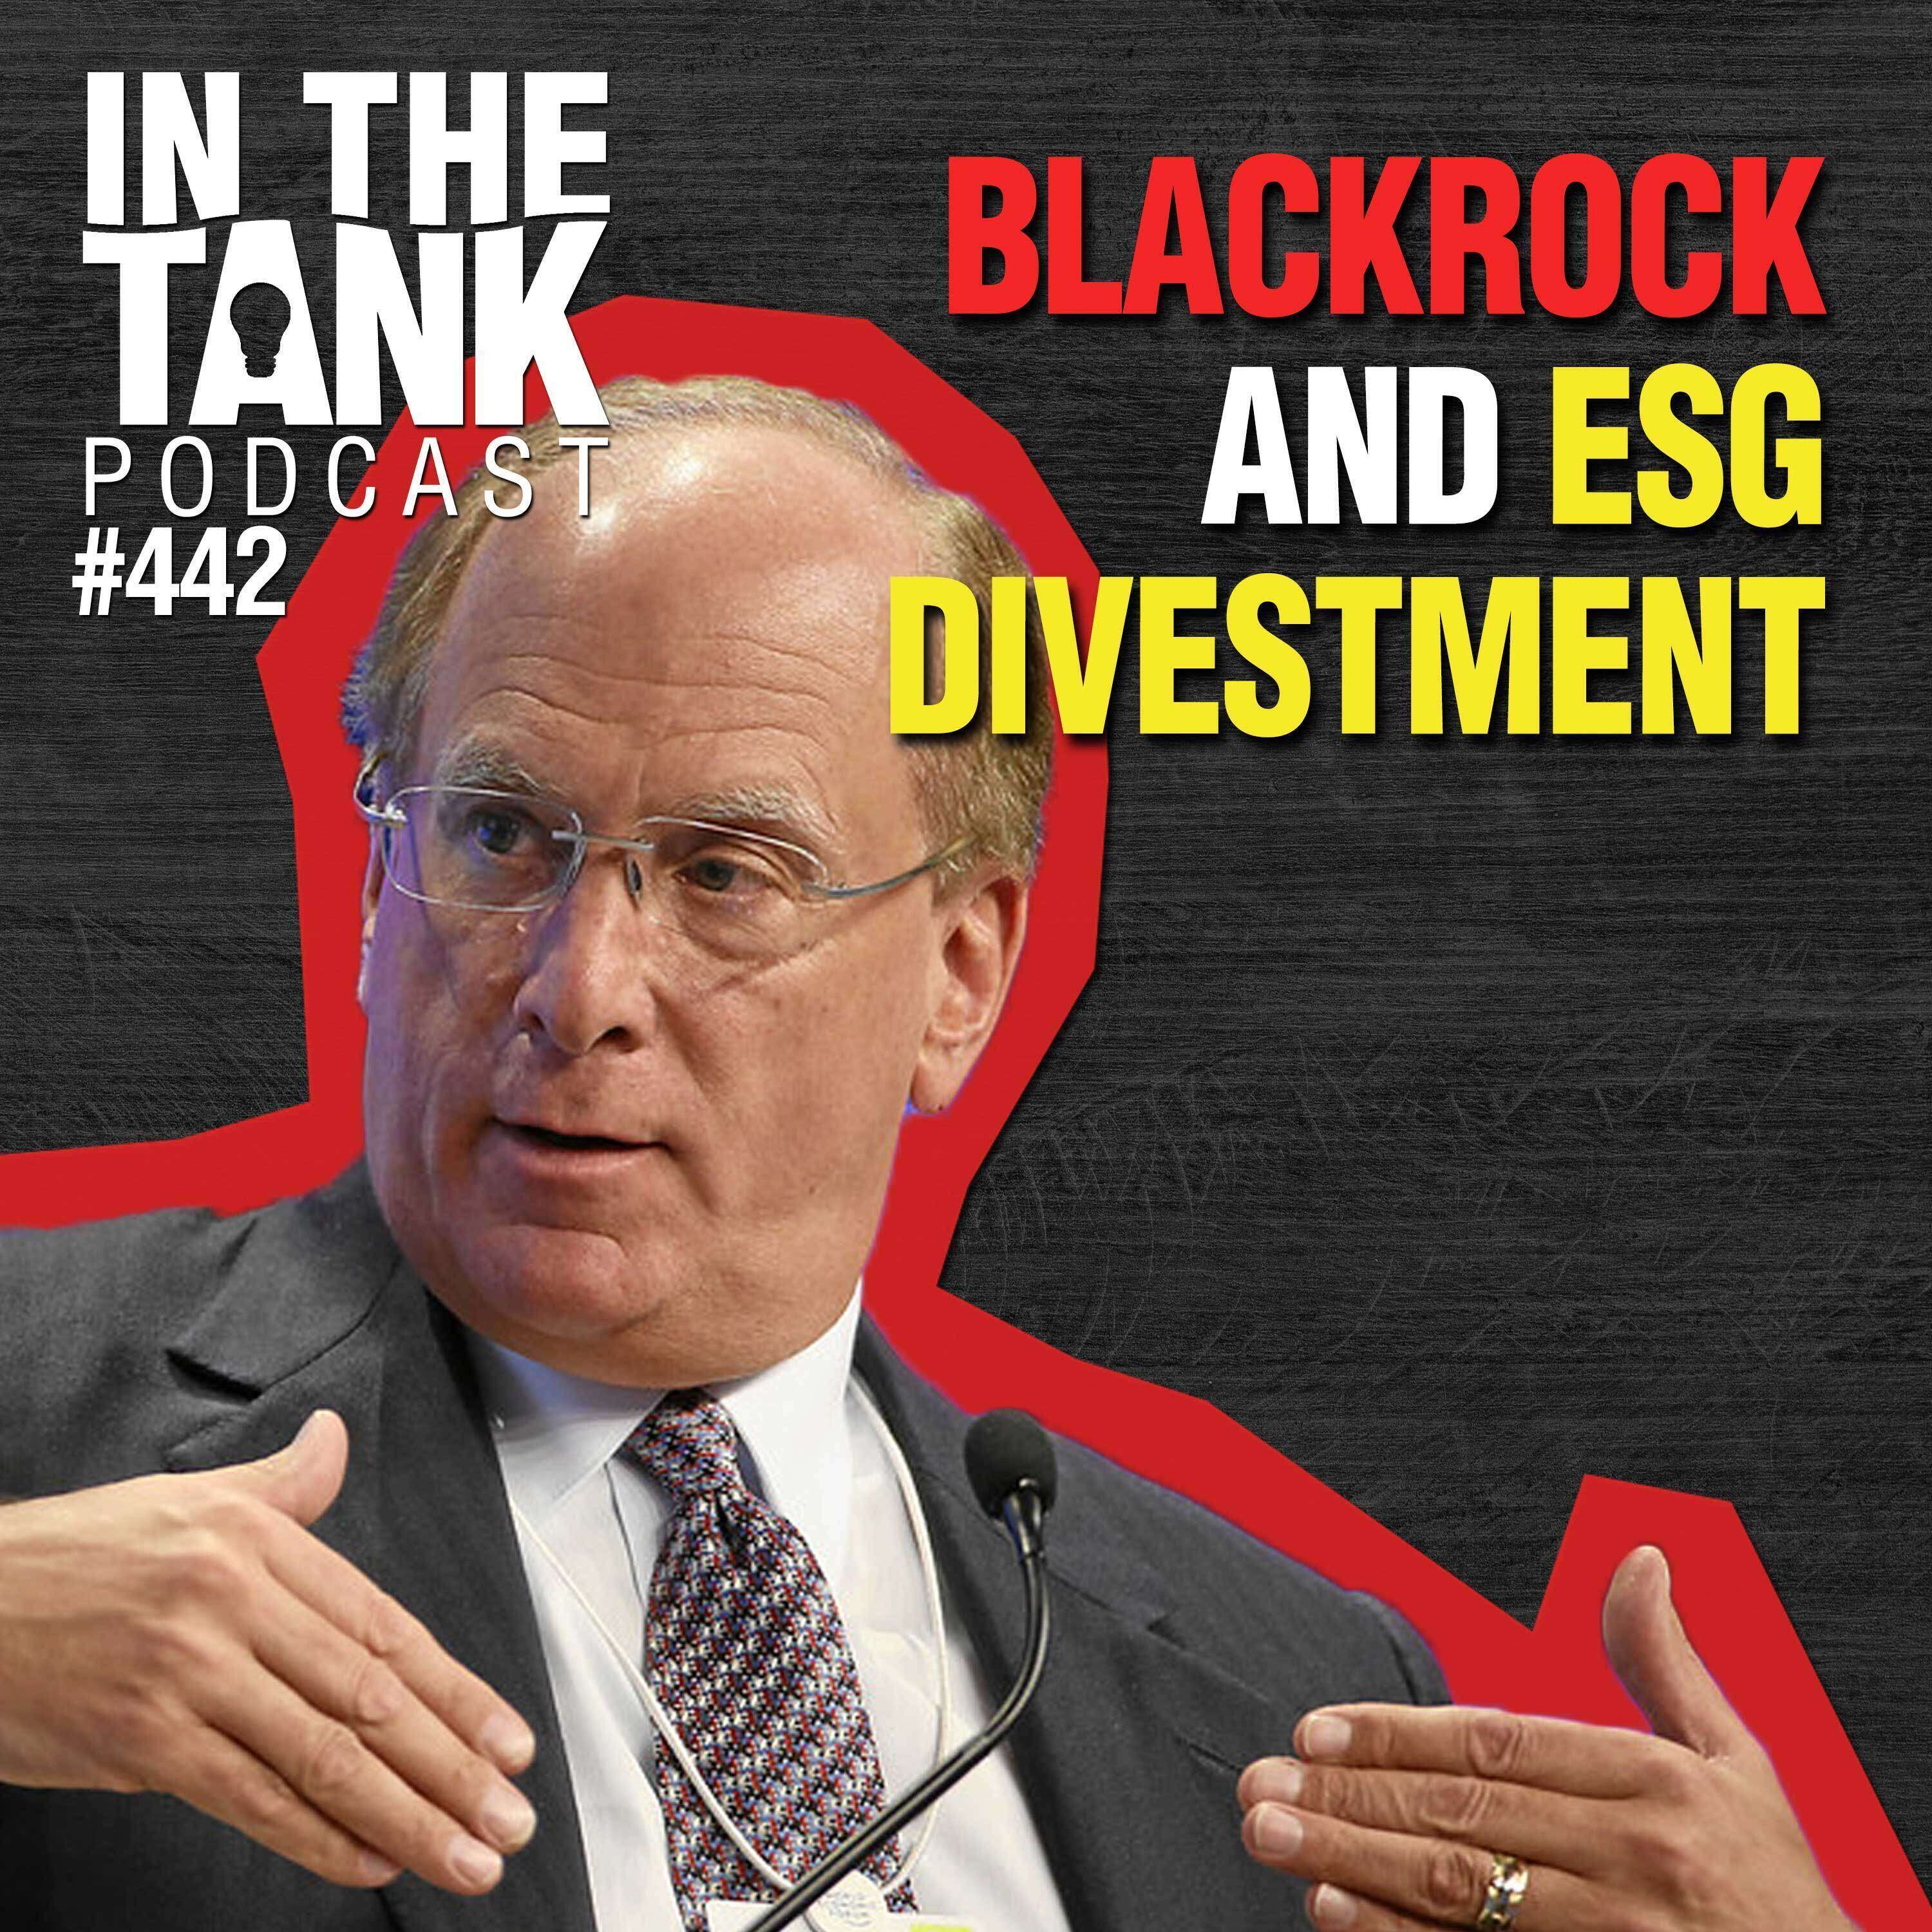 BlackRock and ESG Divestment - In The Tank #442